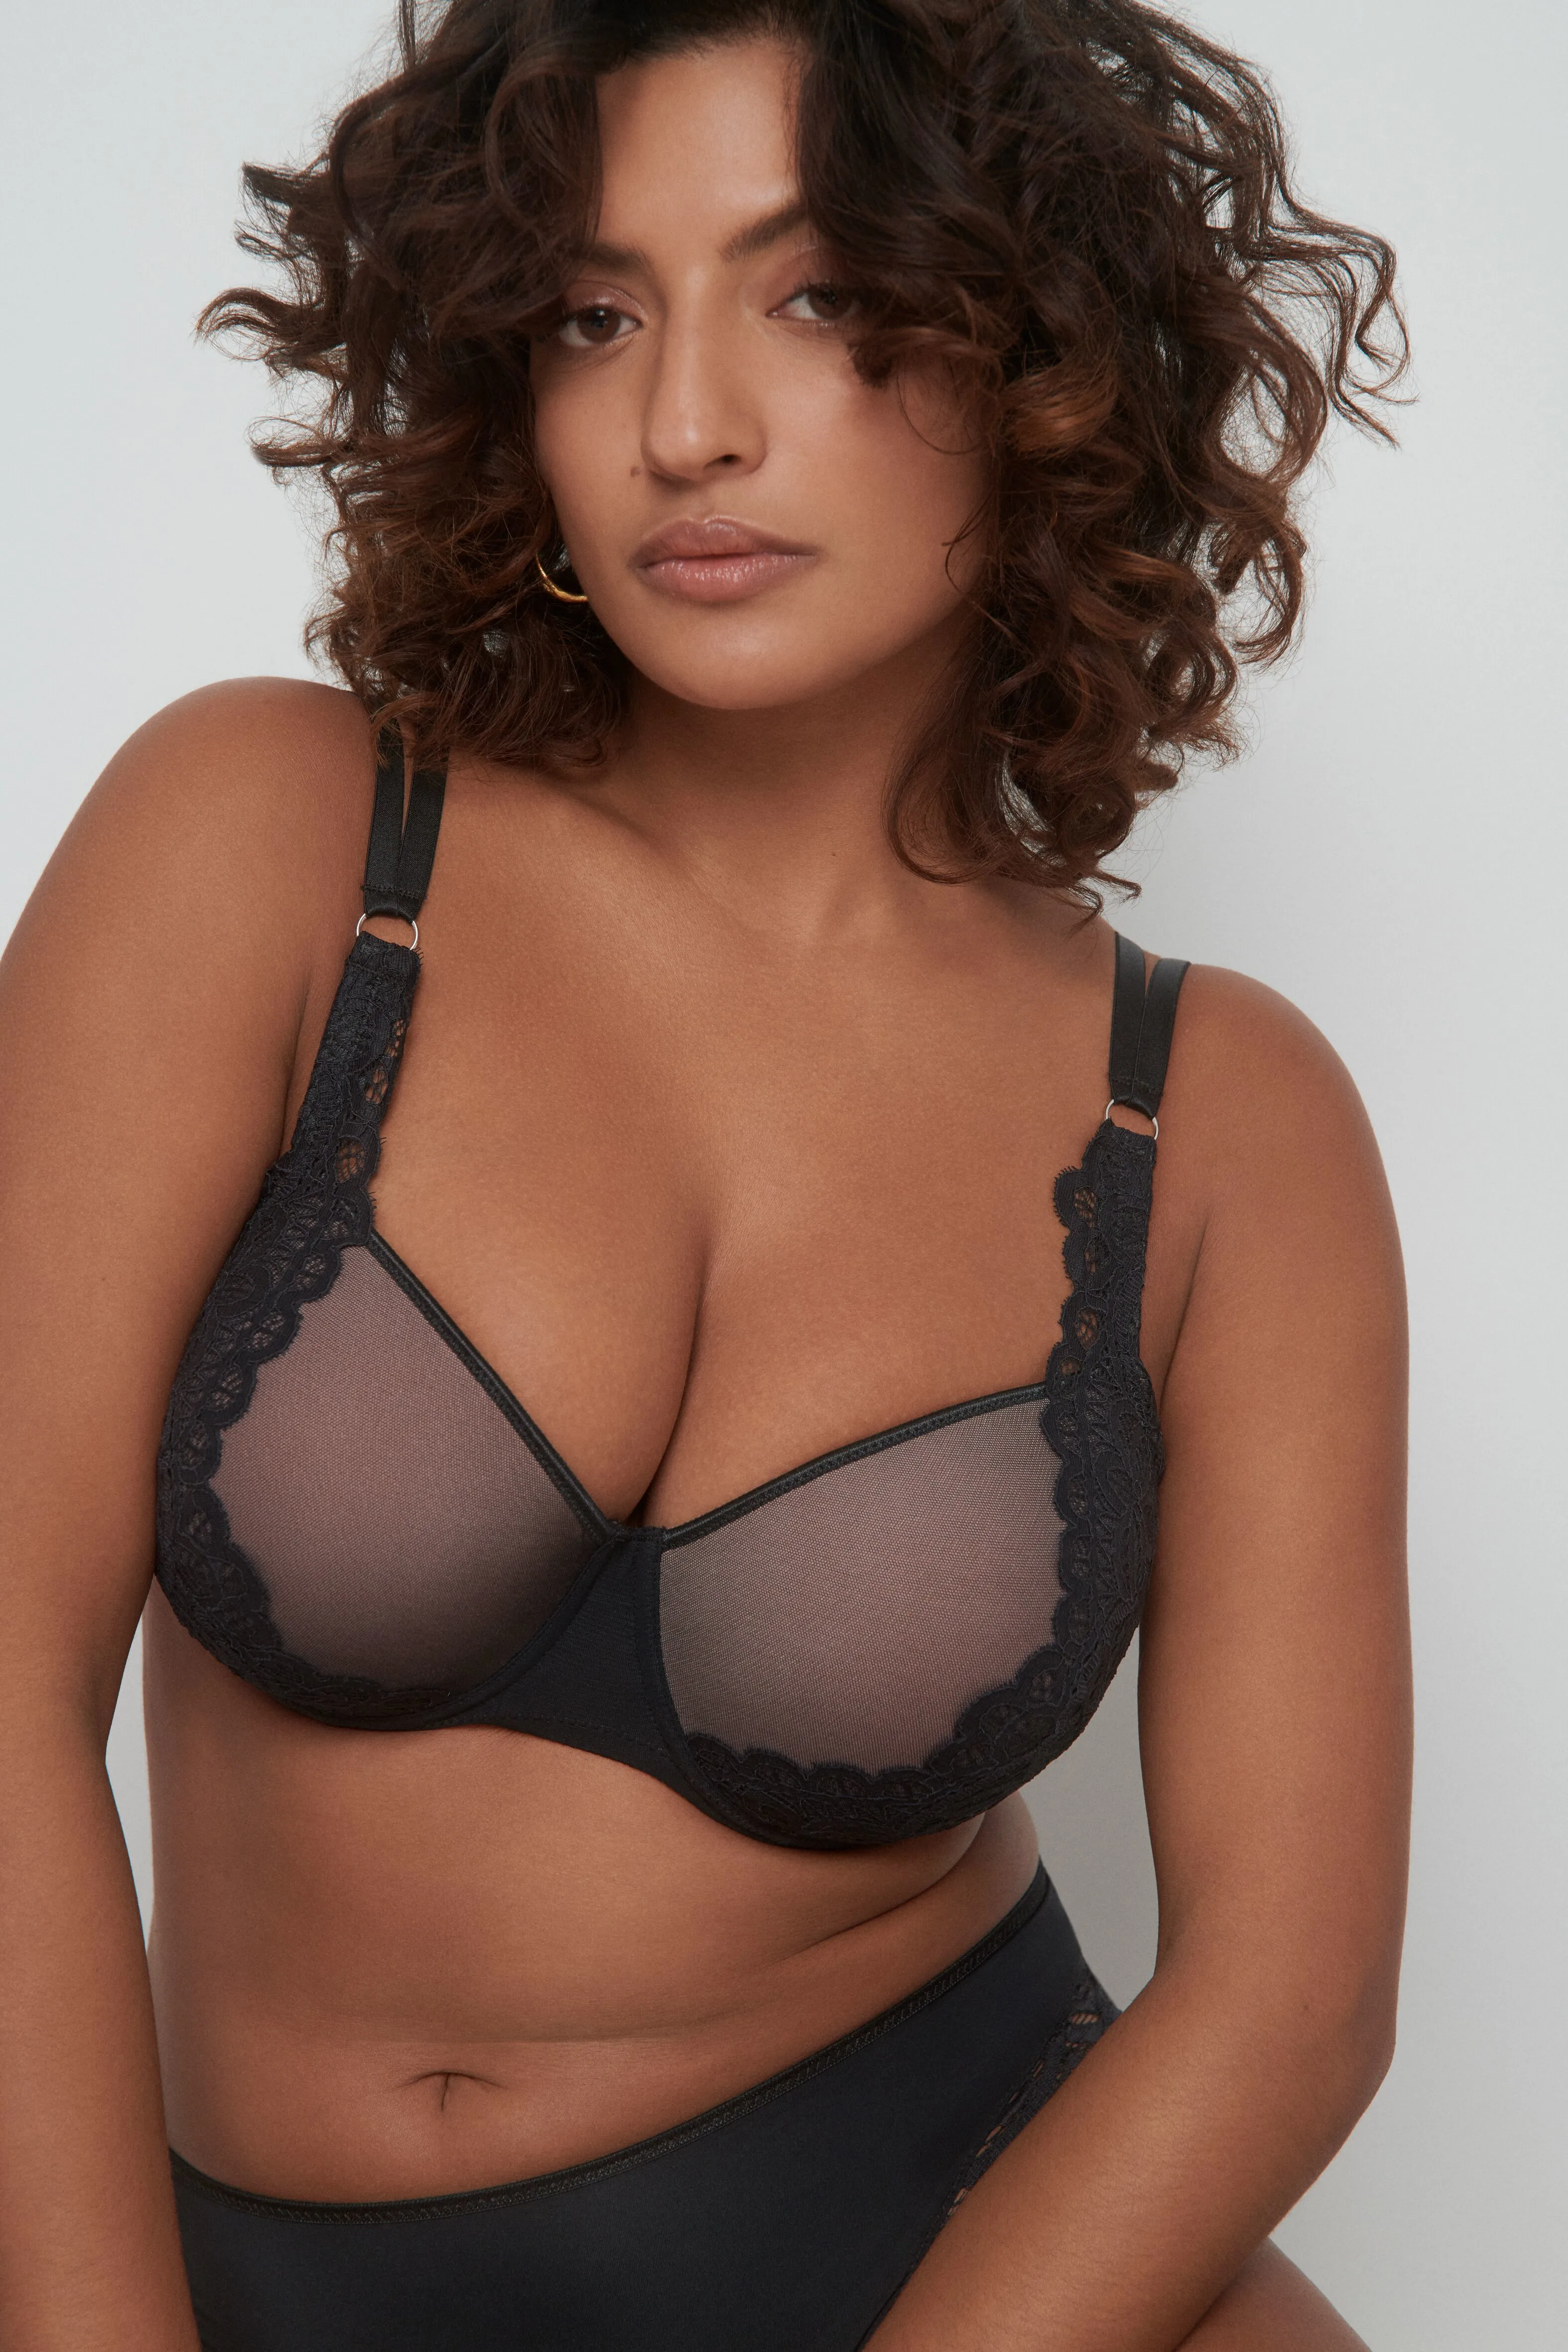 How to: Eliminate Underwire Bra Pain